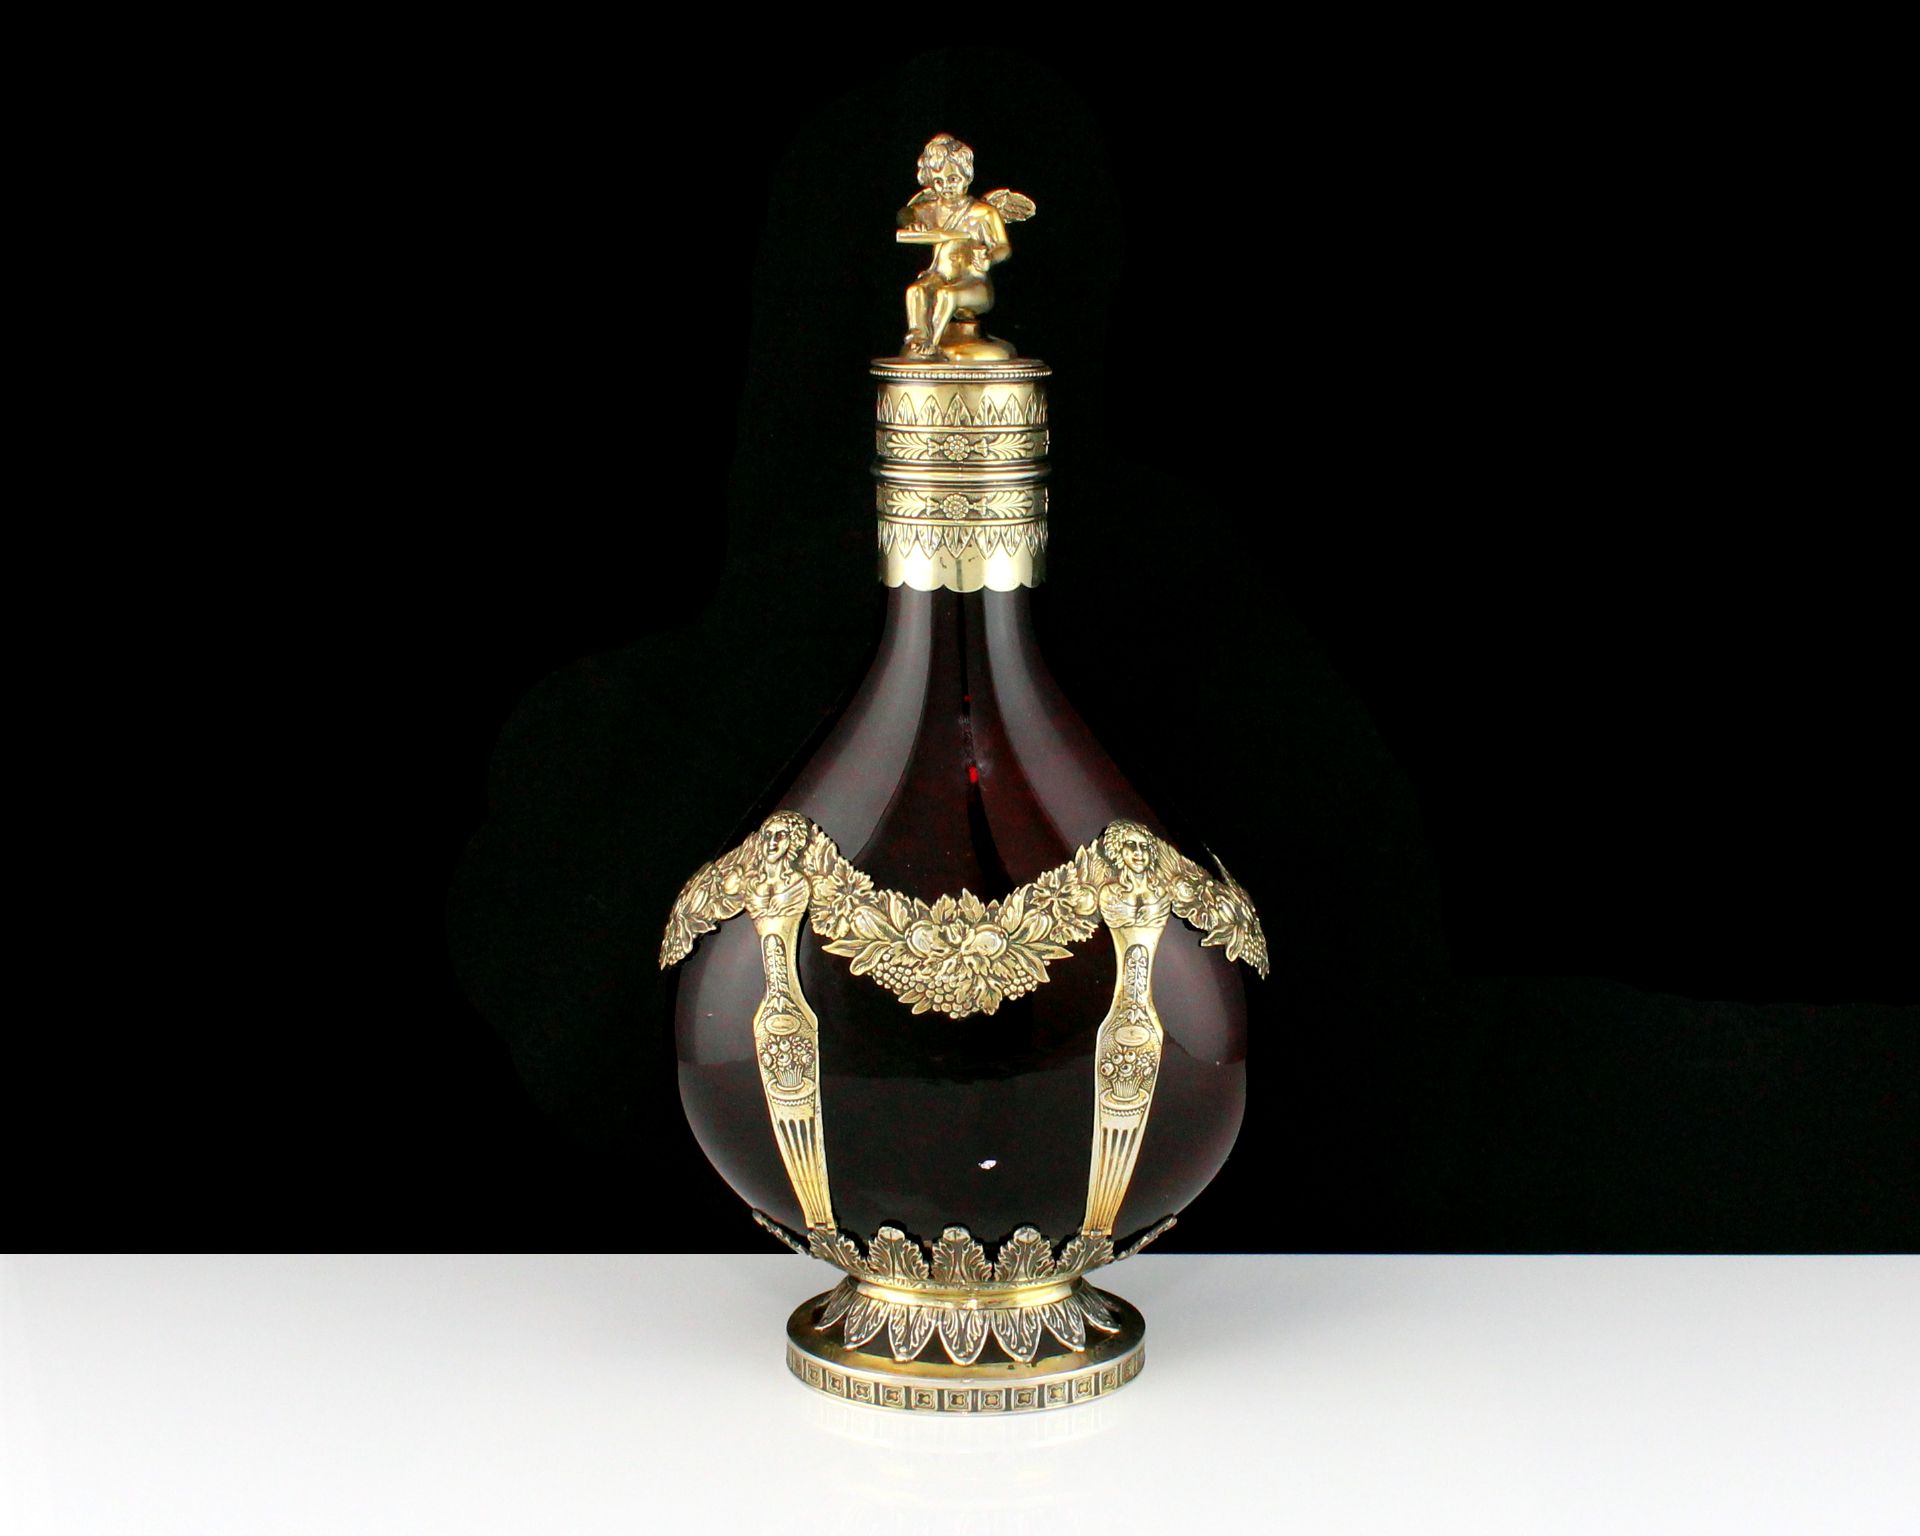 An antique German Silver mounted cranberry glass pilgrim flask / decanter circa 1870 the flattened